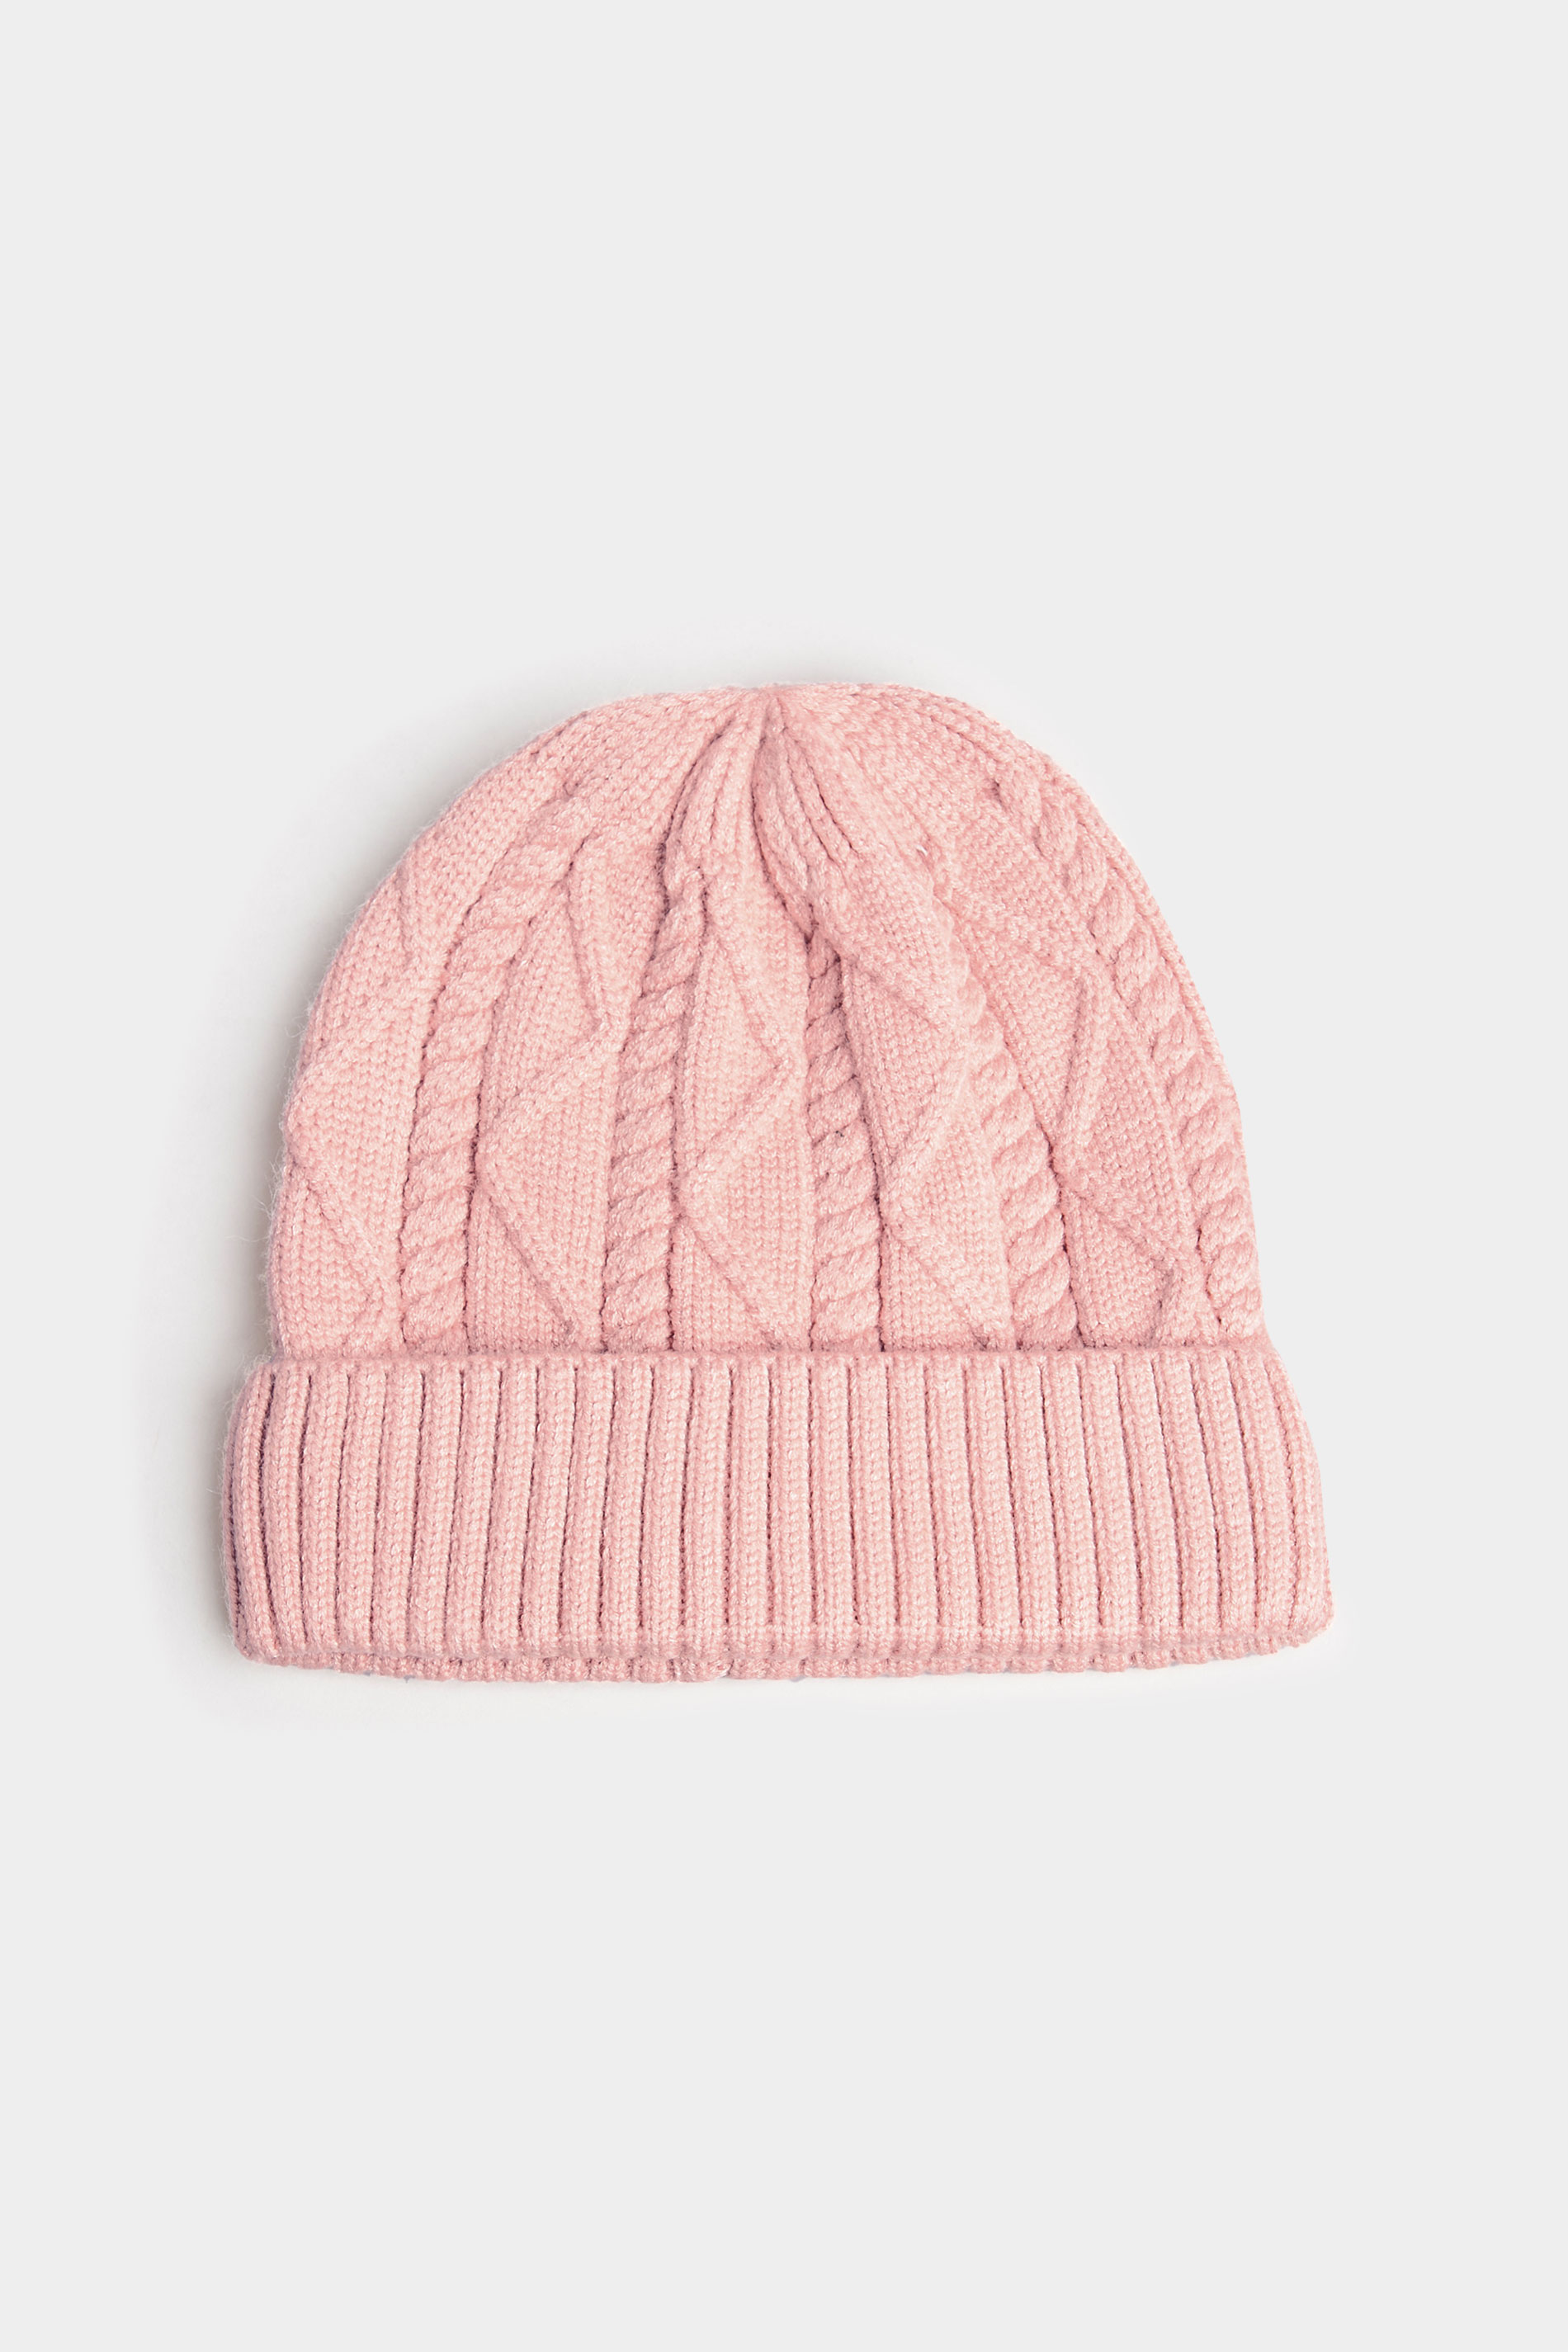 Plus Size Pink Cable Knitted Beanie Hat | Yours Clothing 1